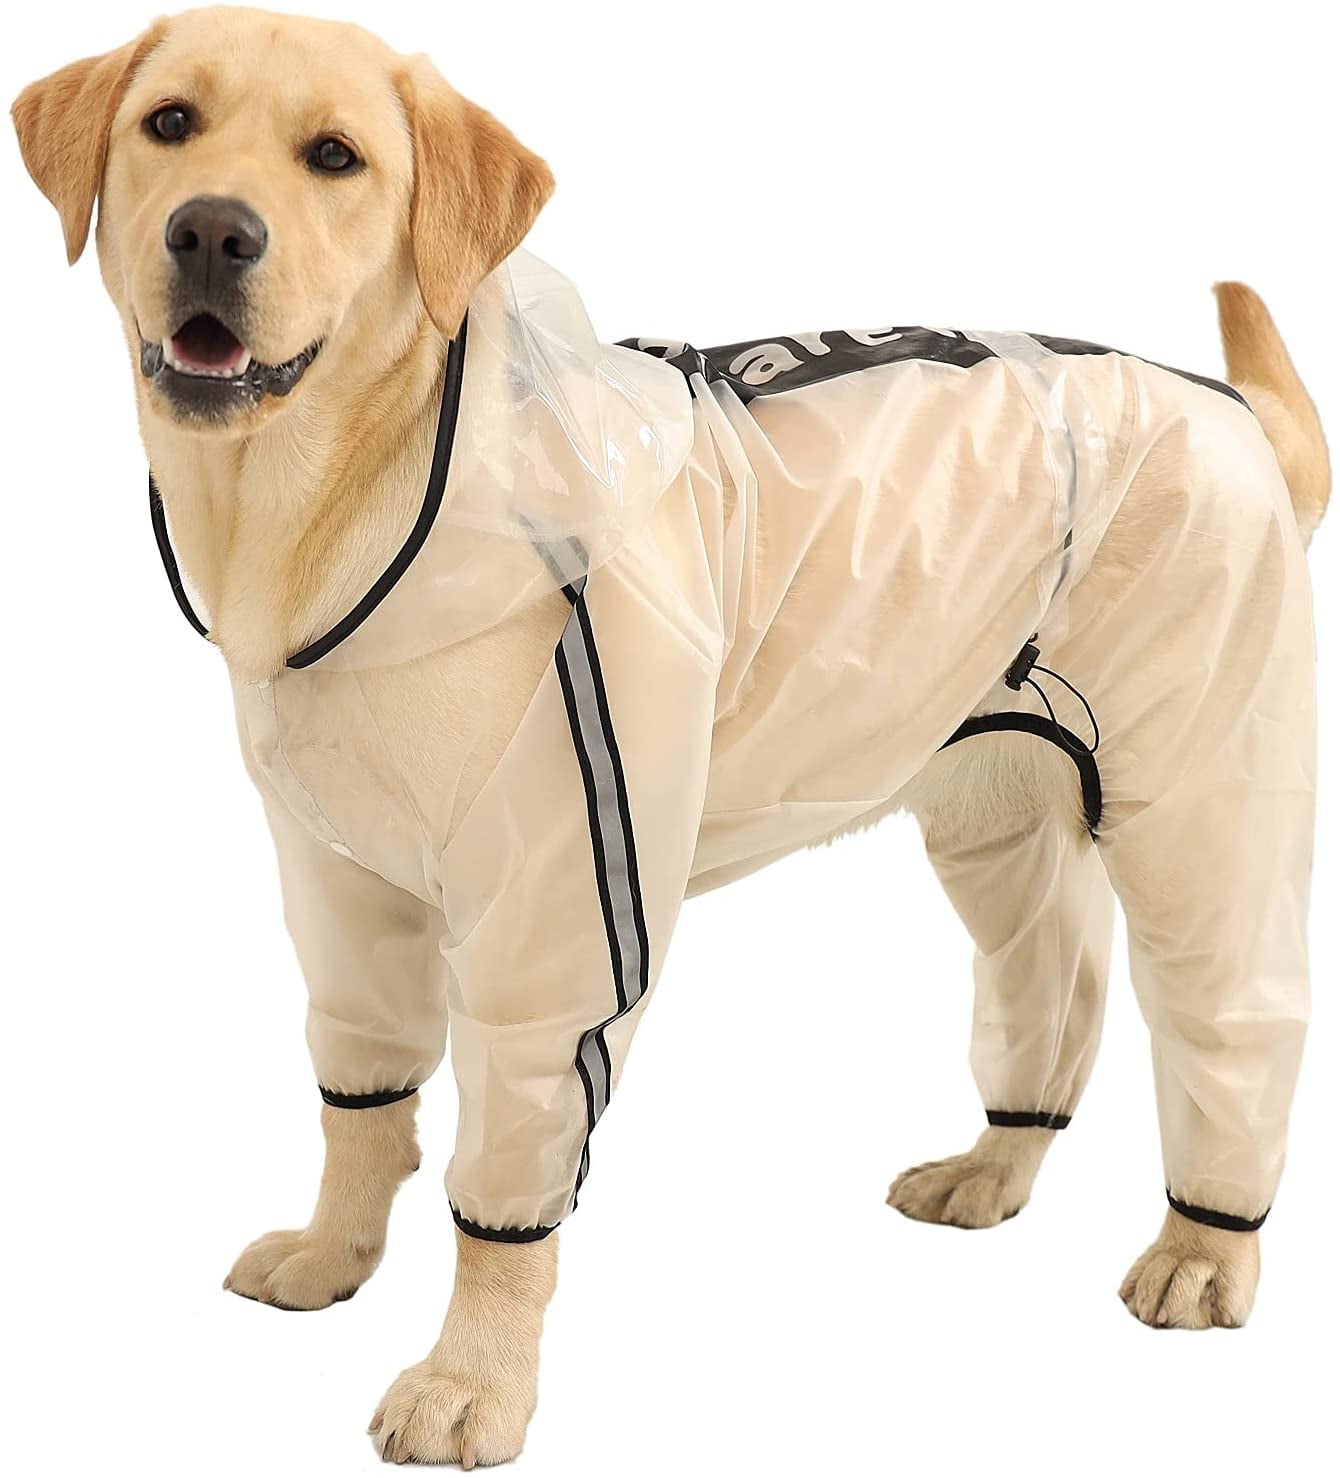 Waterproof Dog Raincoat Safety Reflective Rain Coat Outfit Clothes Apparel 